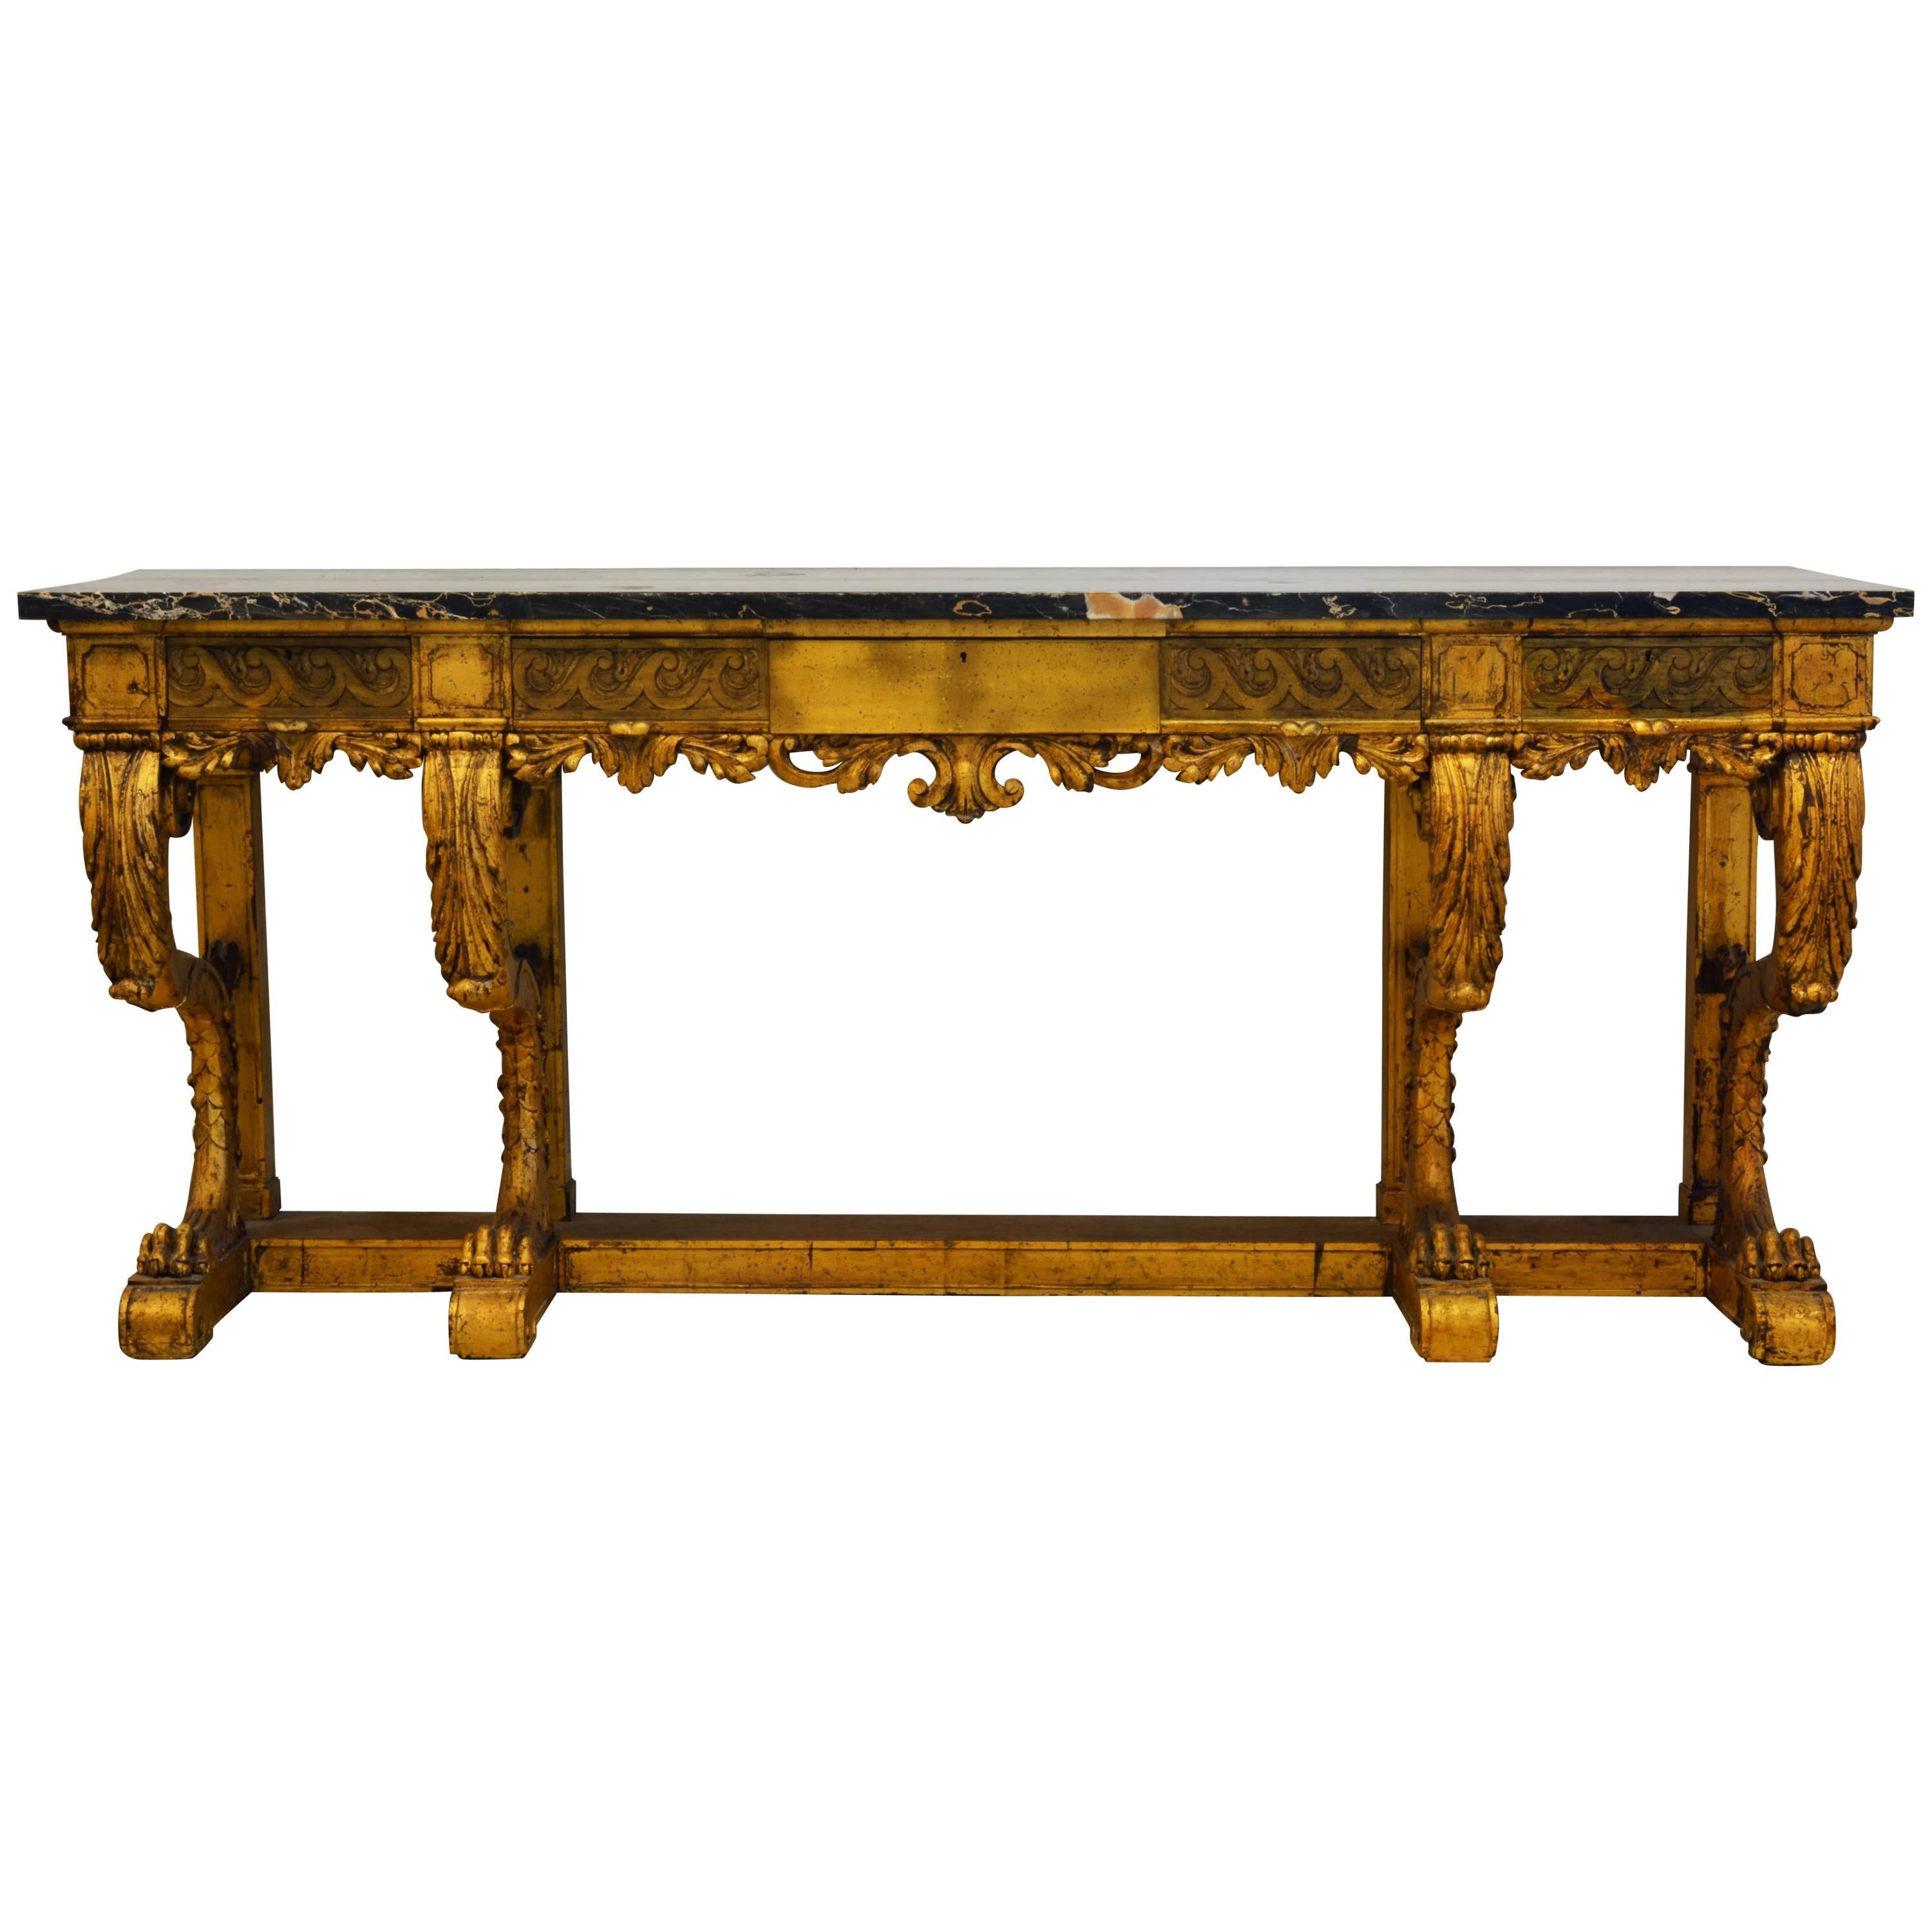 Palatial Early 20th Century Italian Carved Giltwood and Marble-Top Console Table